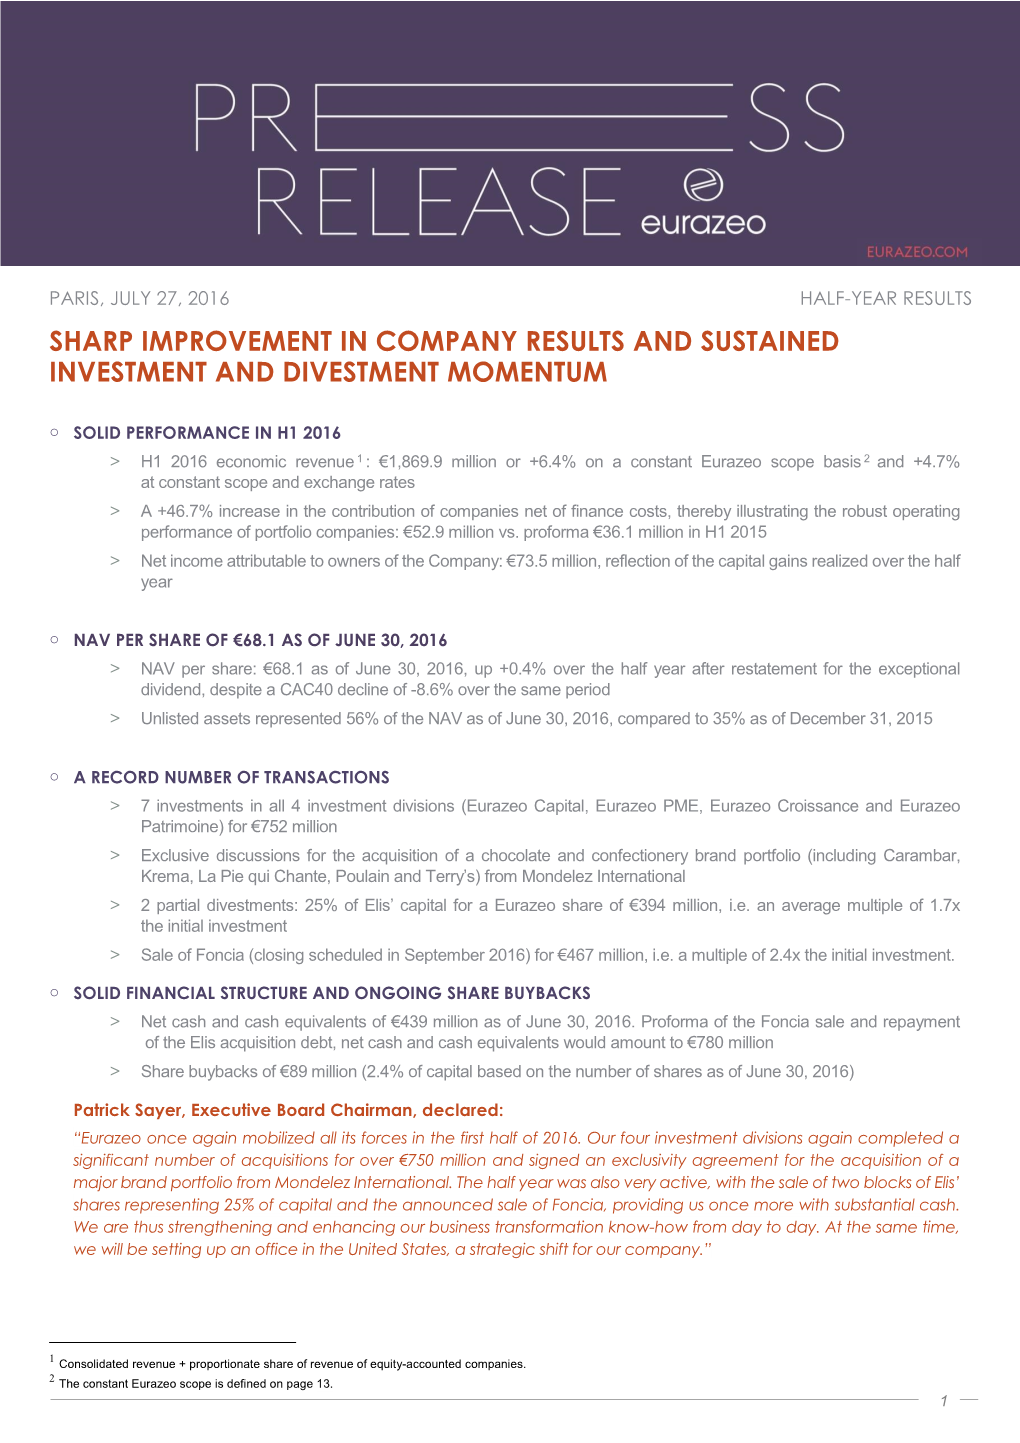 Sharp Improvement in Company Results and Sustained Investment and Divestment Momentum